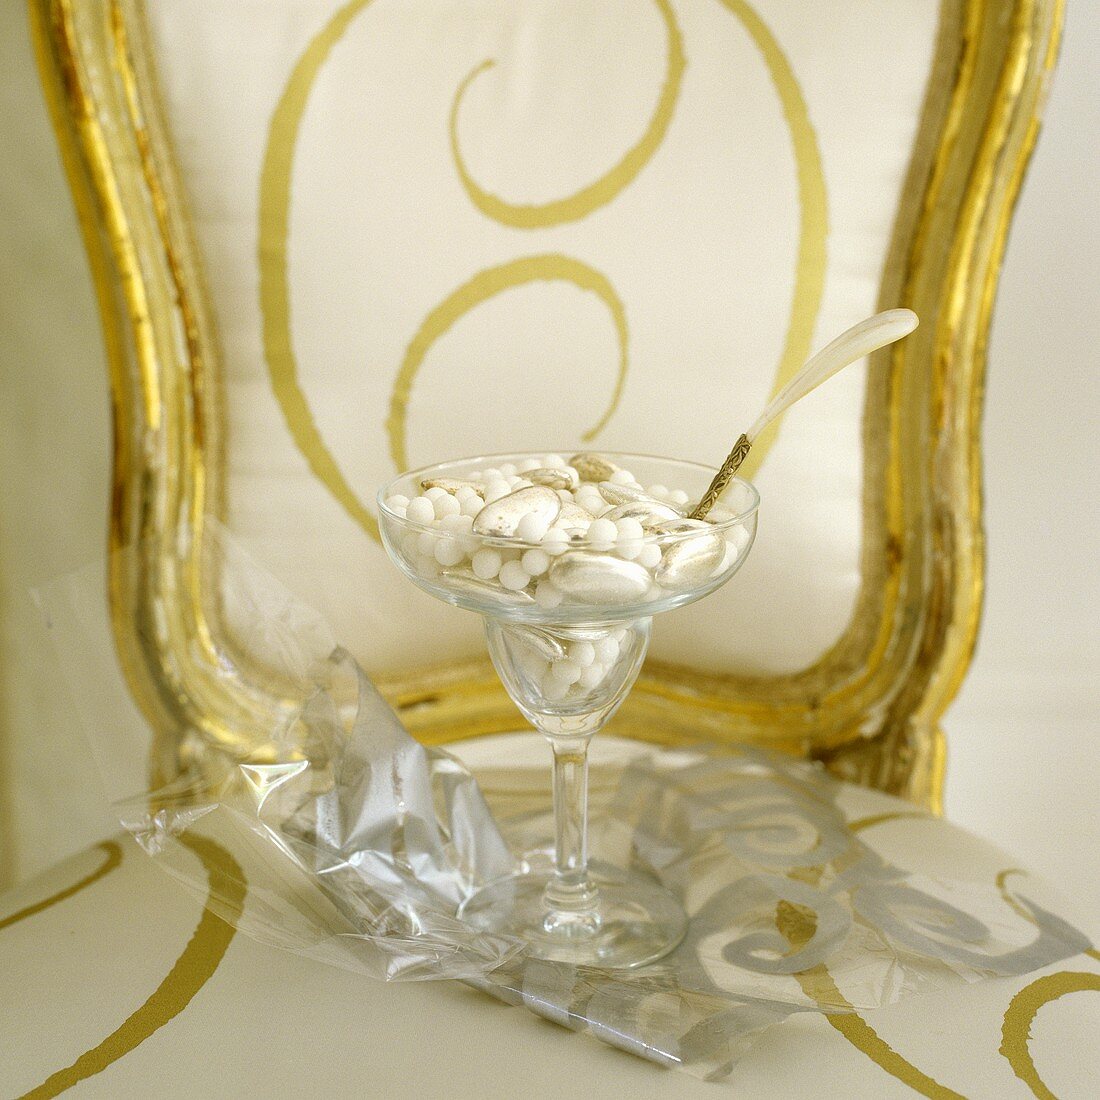 A spoon in a cocktail glass filled with beads and shells on a gold-framed chair